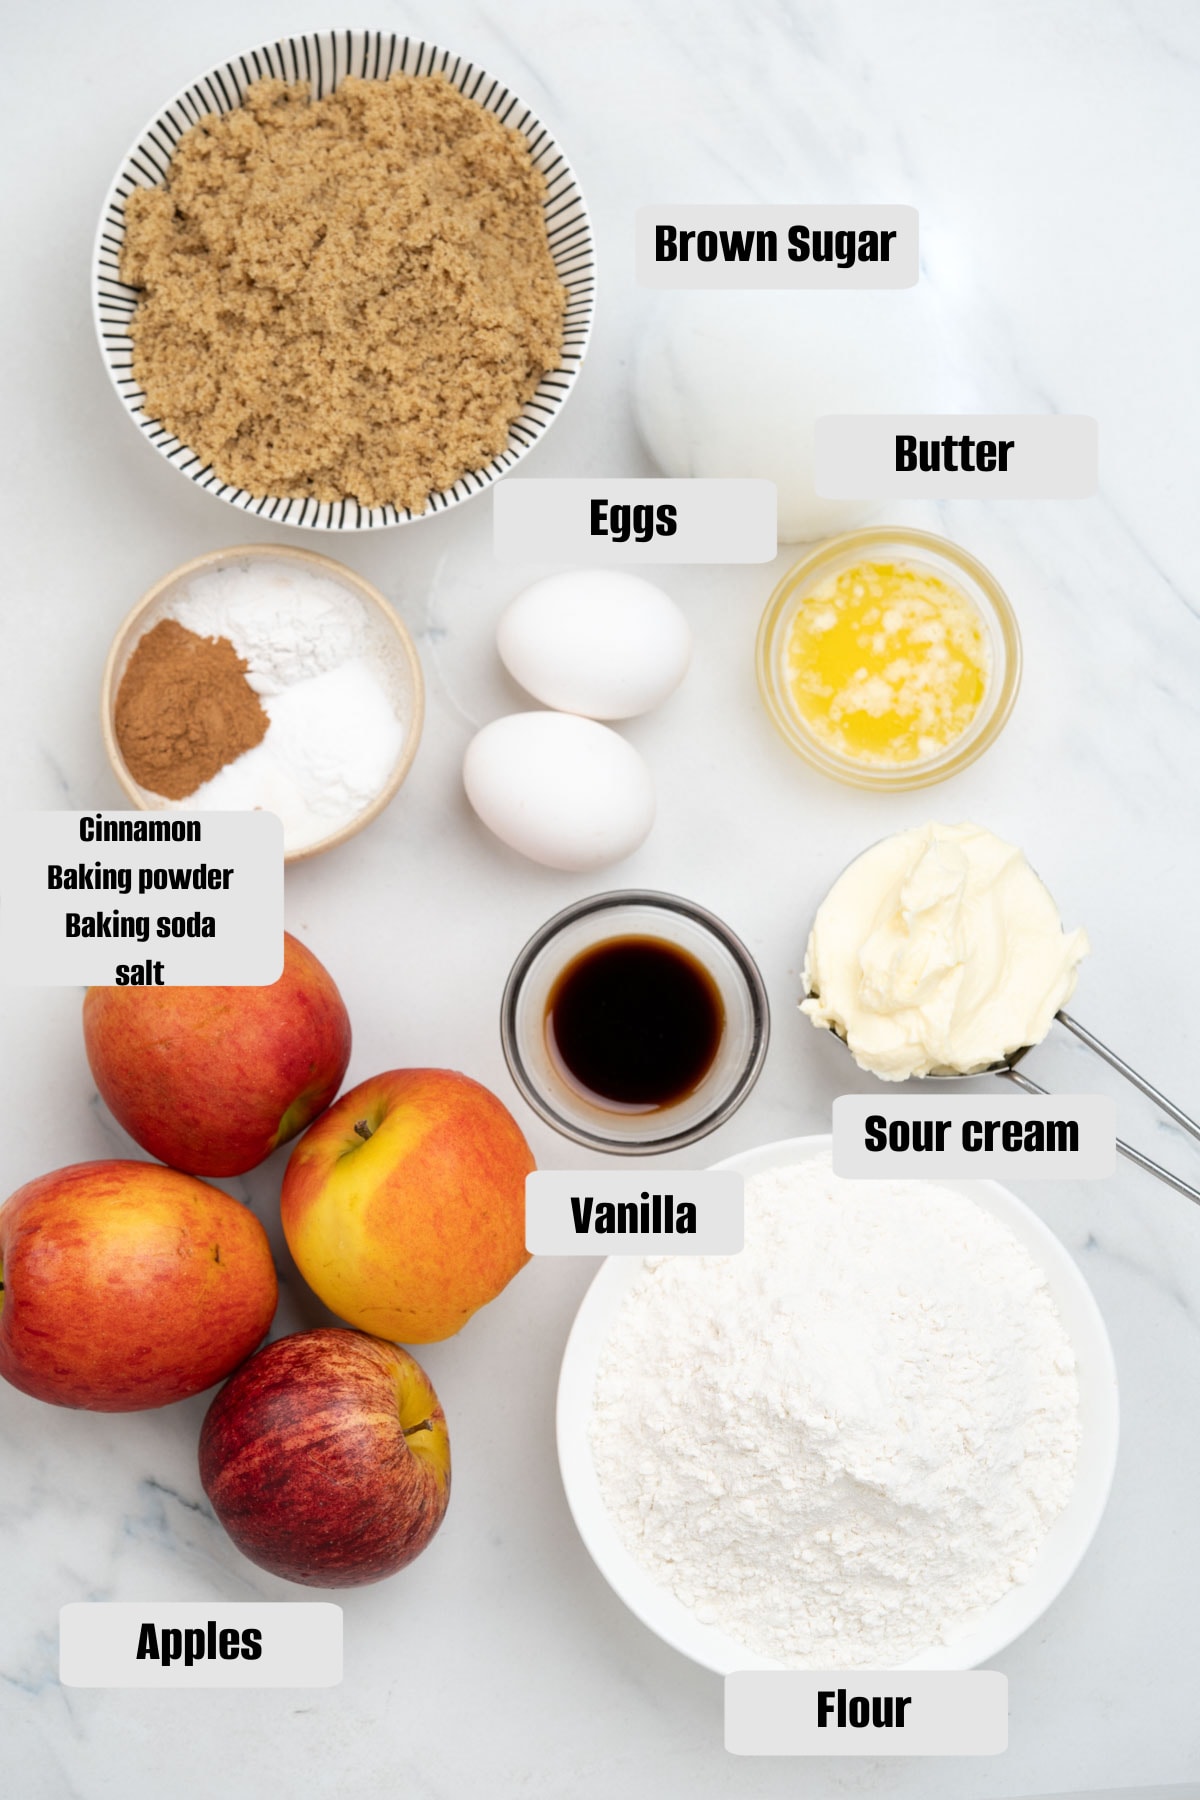 Ingredients for Cinnamon Apple Muffins - some to form the body of the muffins, others to add flavor and taste.